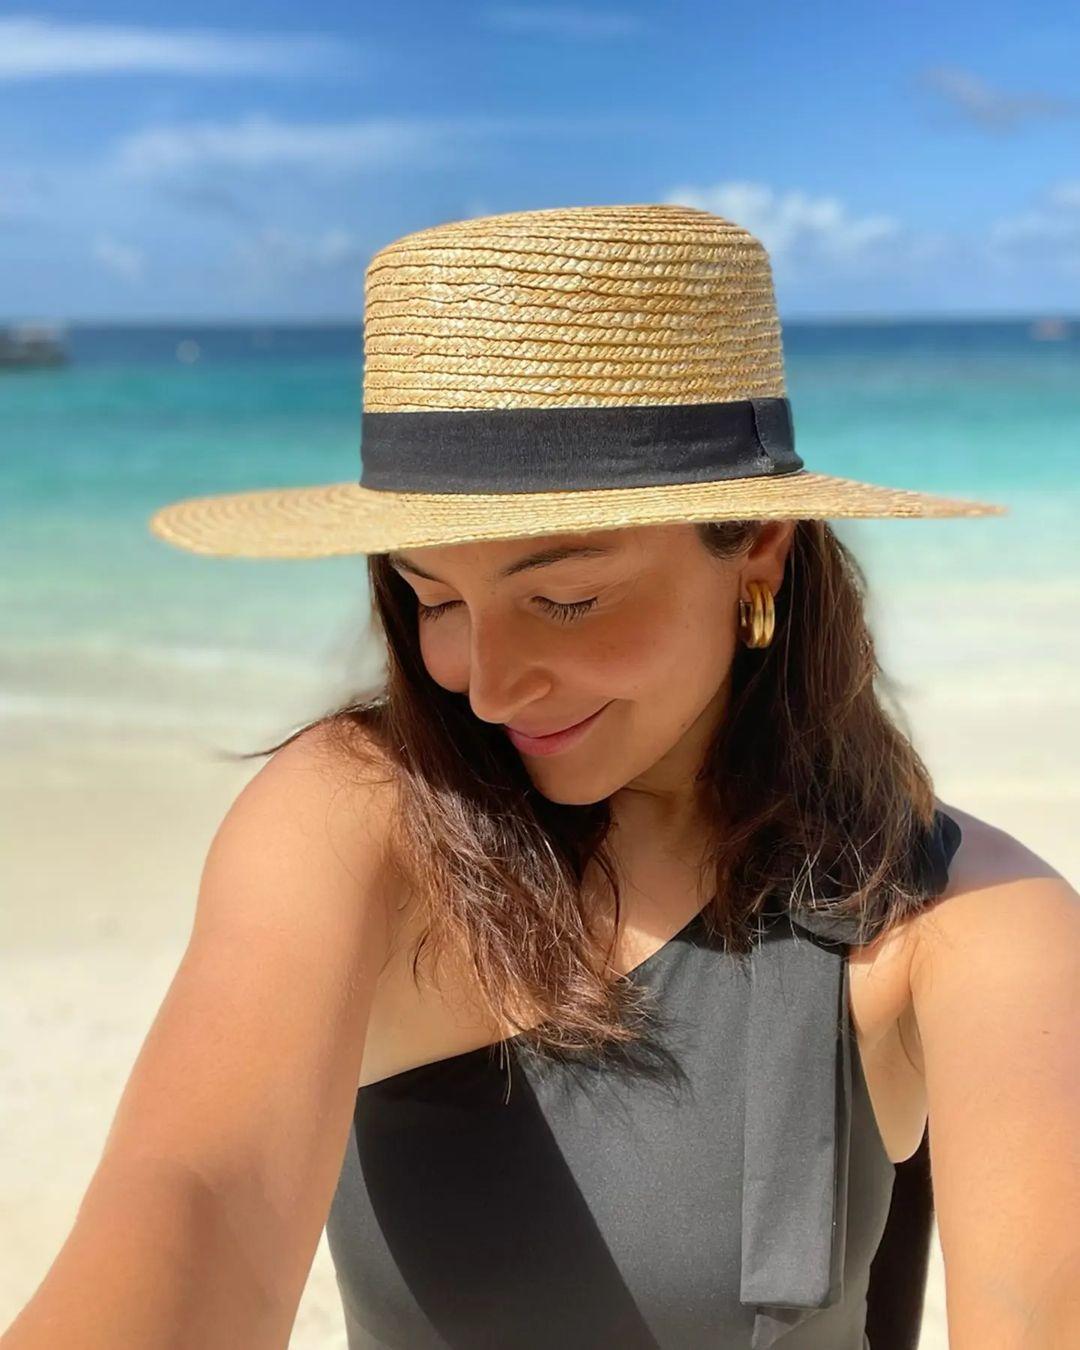 Anushka Sharma's picture, clicked in front of a picturesque sky and a clean beach, is something we are jealous of